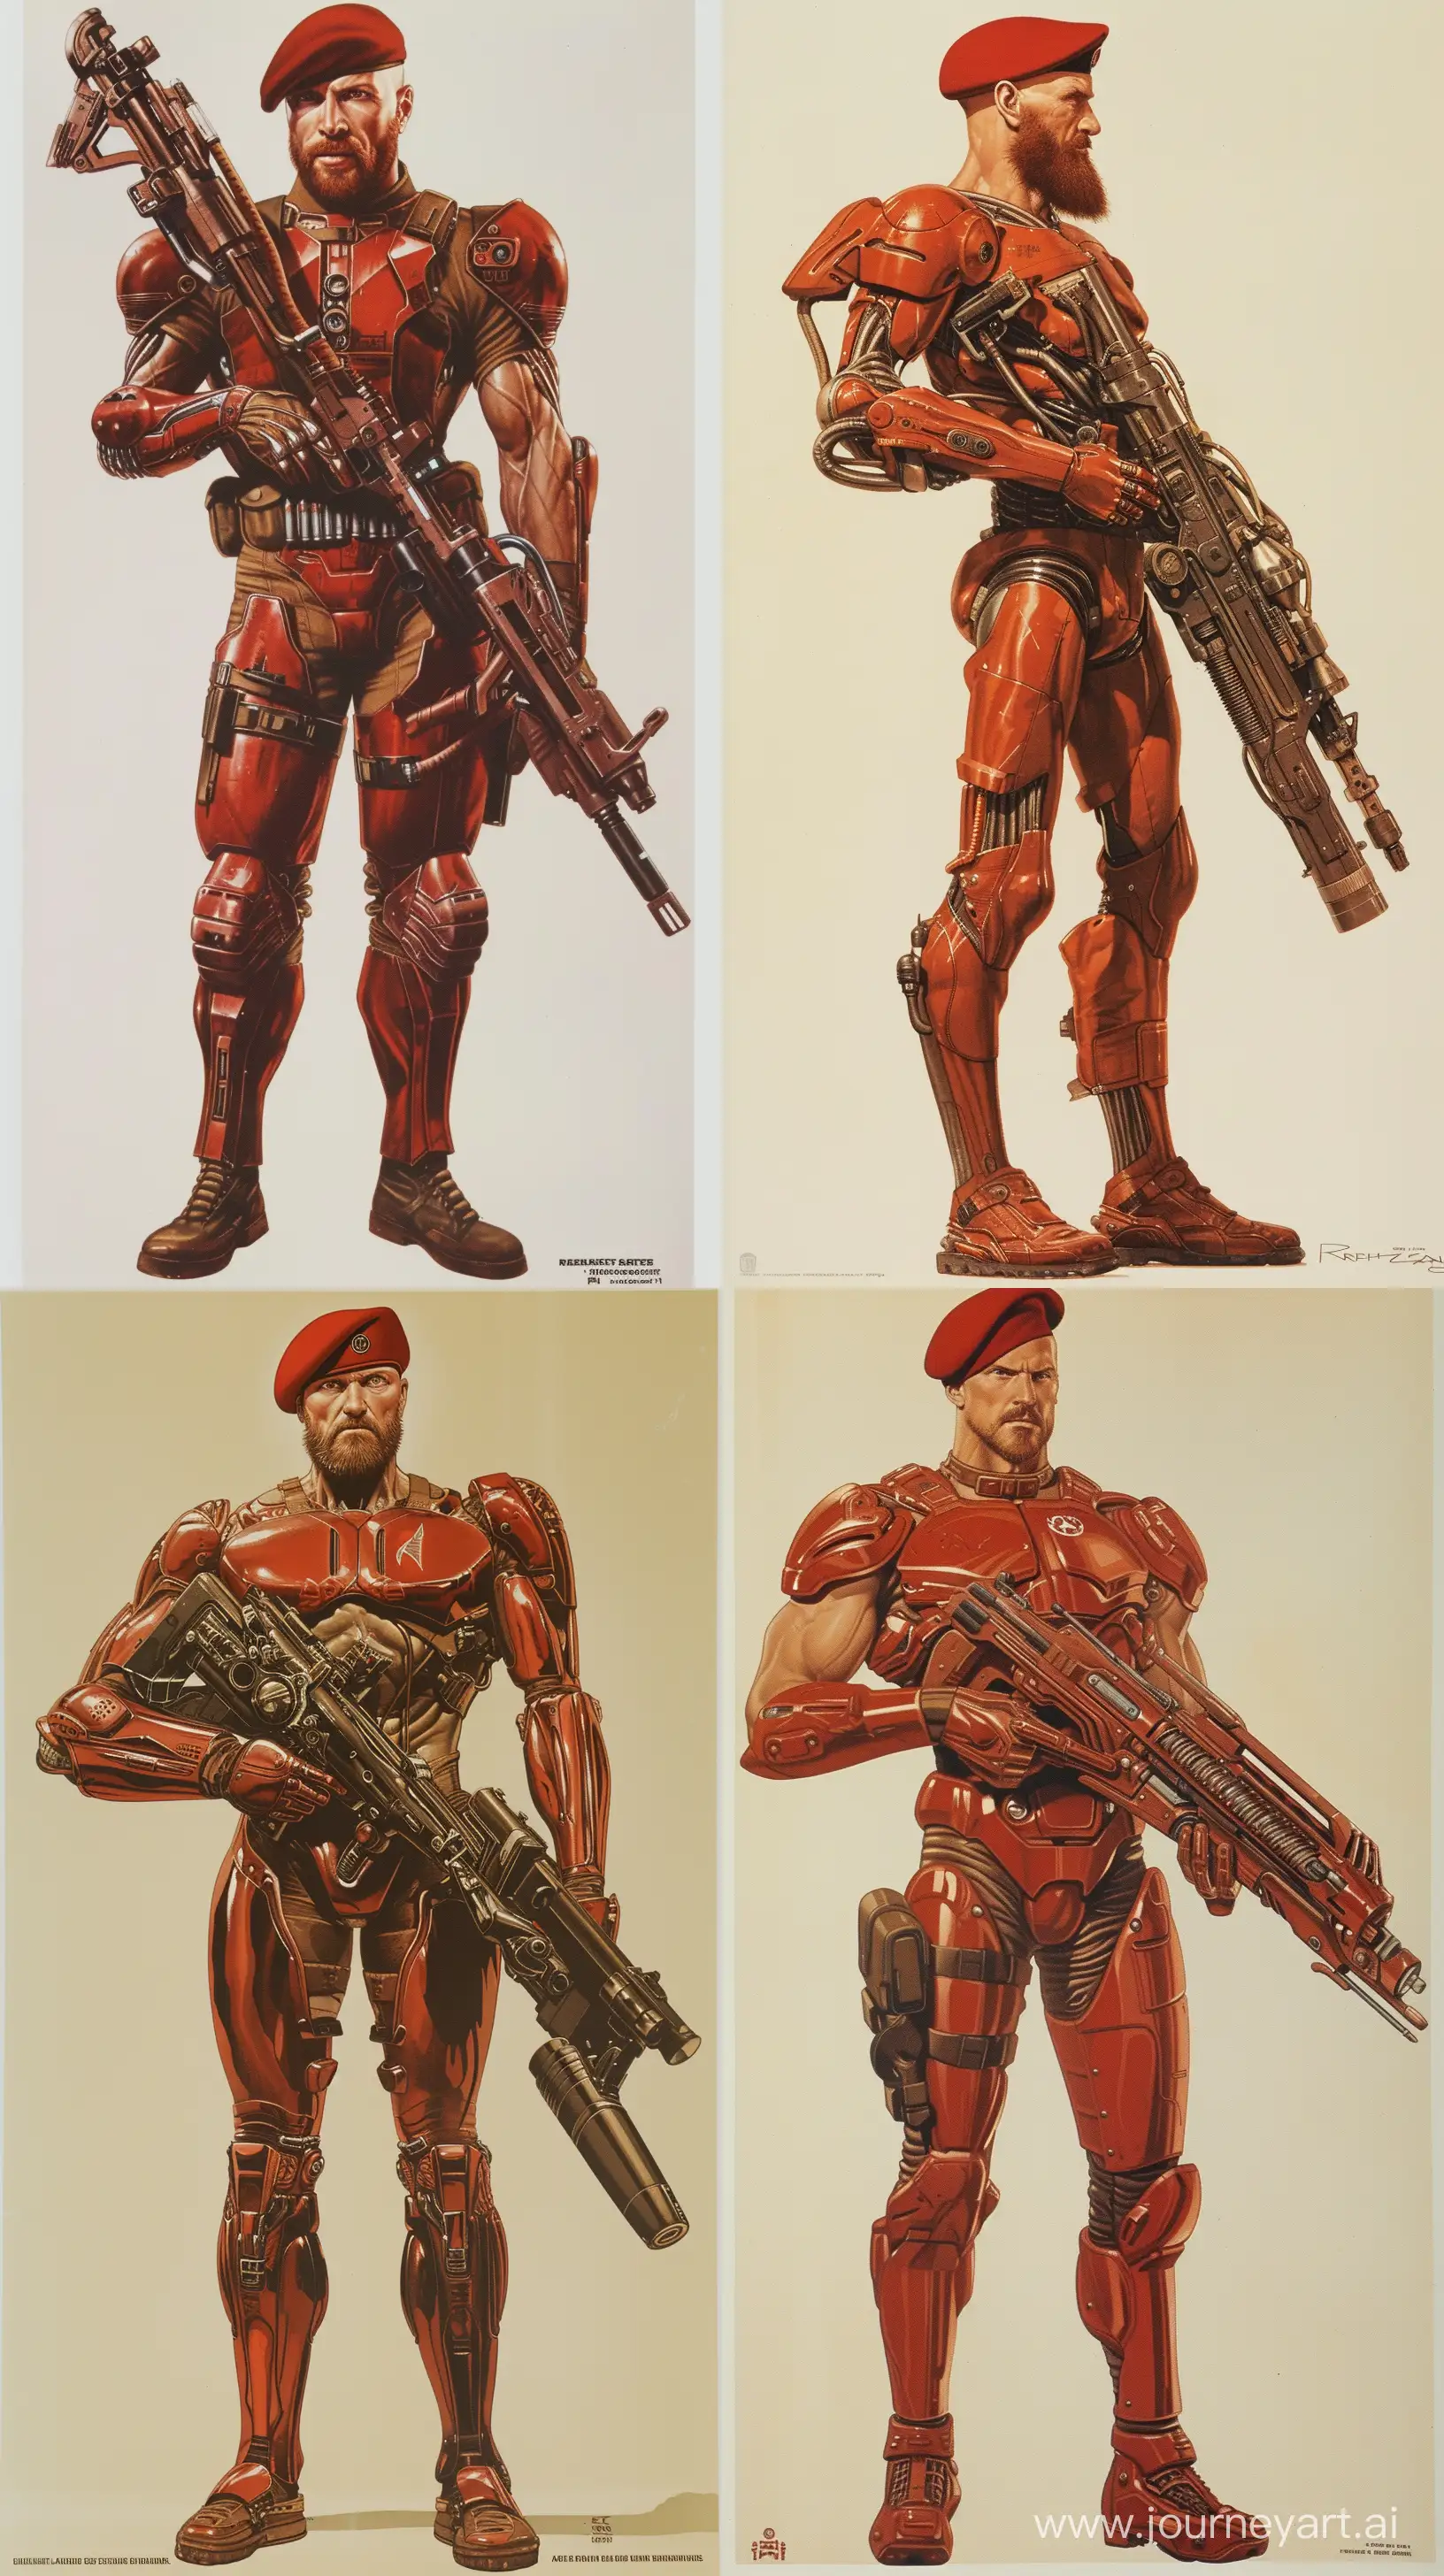 Retro-Science-Fiction-Soldier-in-Red-Plated-Armor-with-Futuristic-Rifle